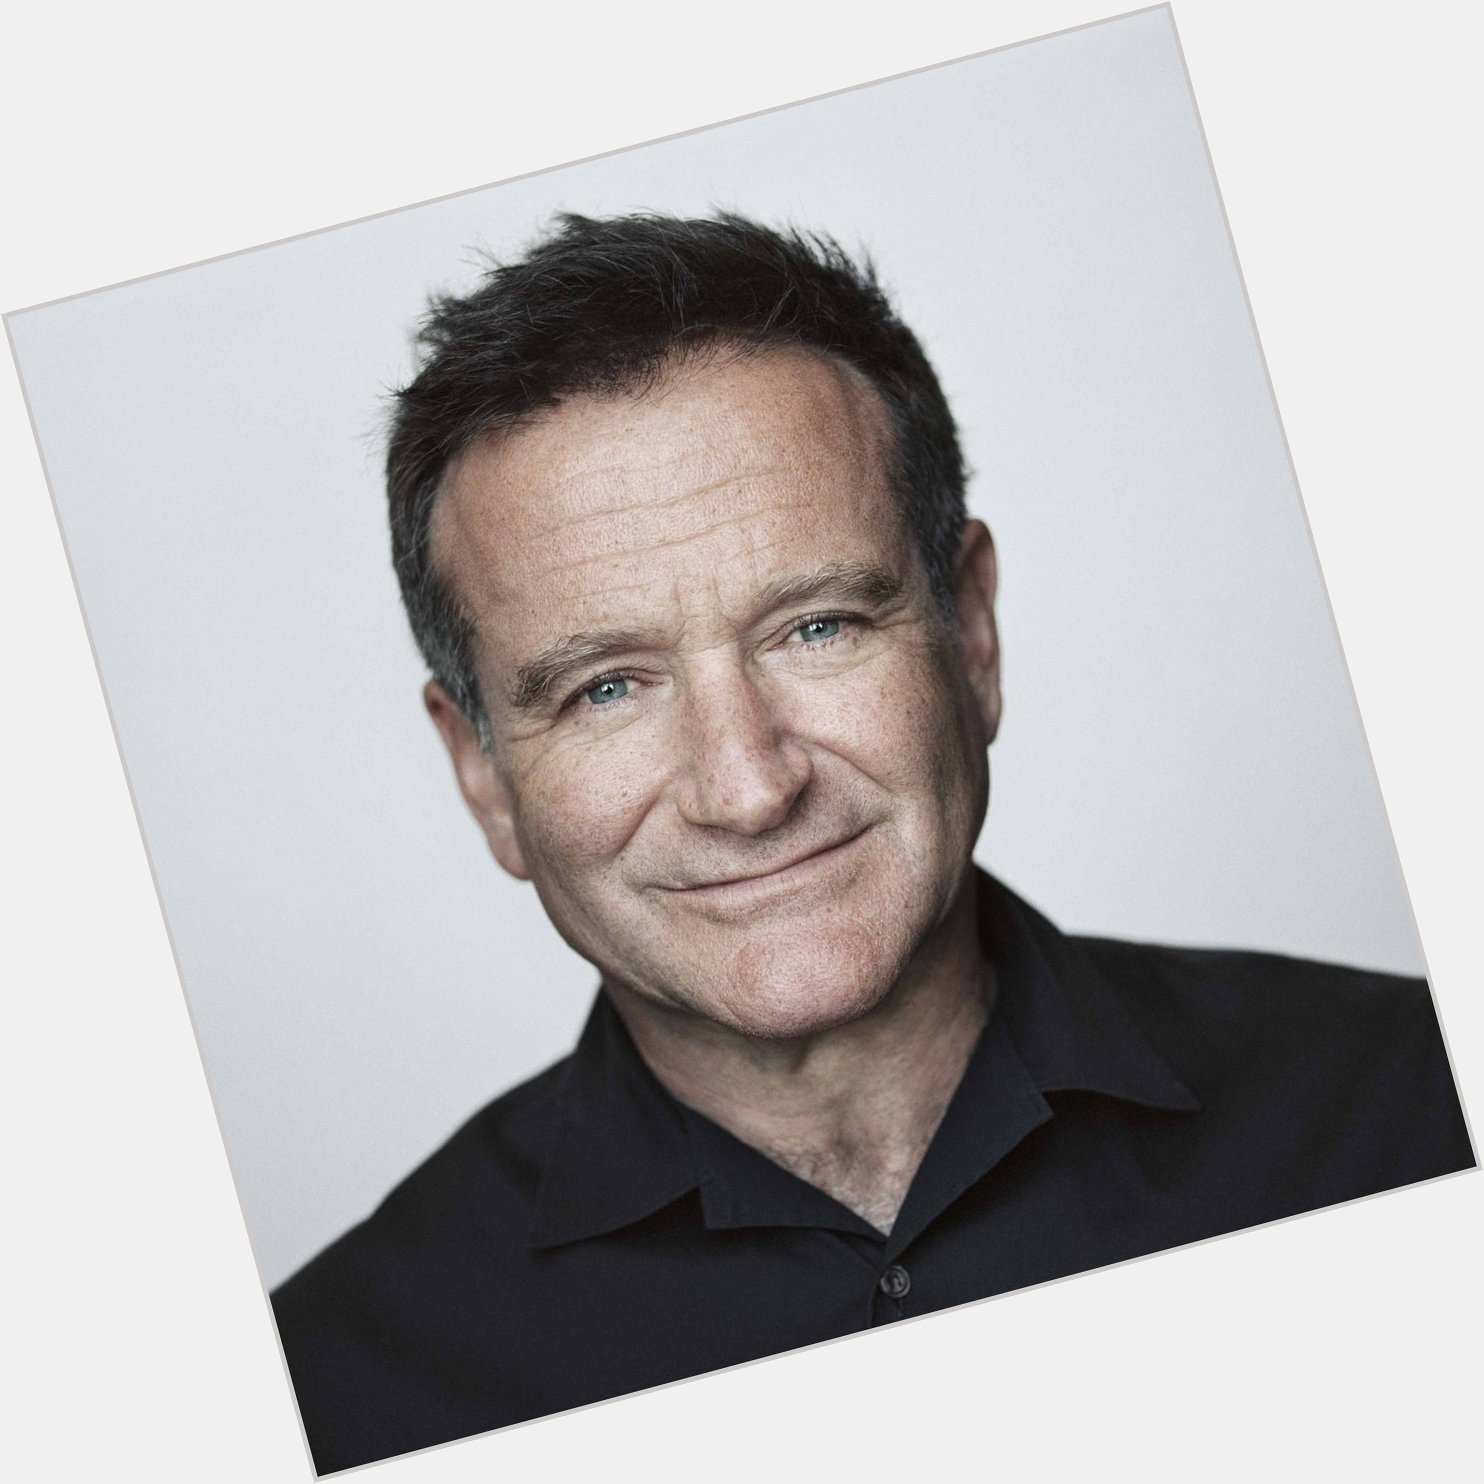 Happy birthday to the legend and one of the greatest comedians, Robin Williams, who would have turn 69 today  